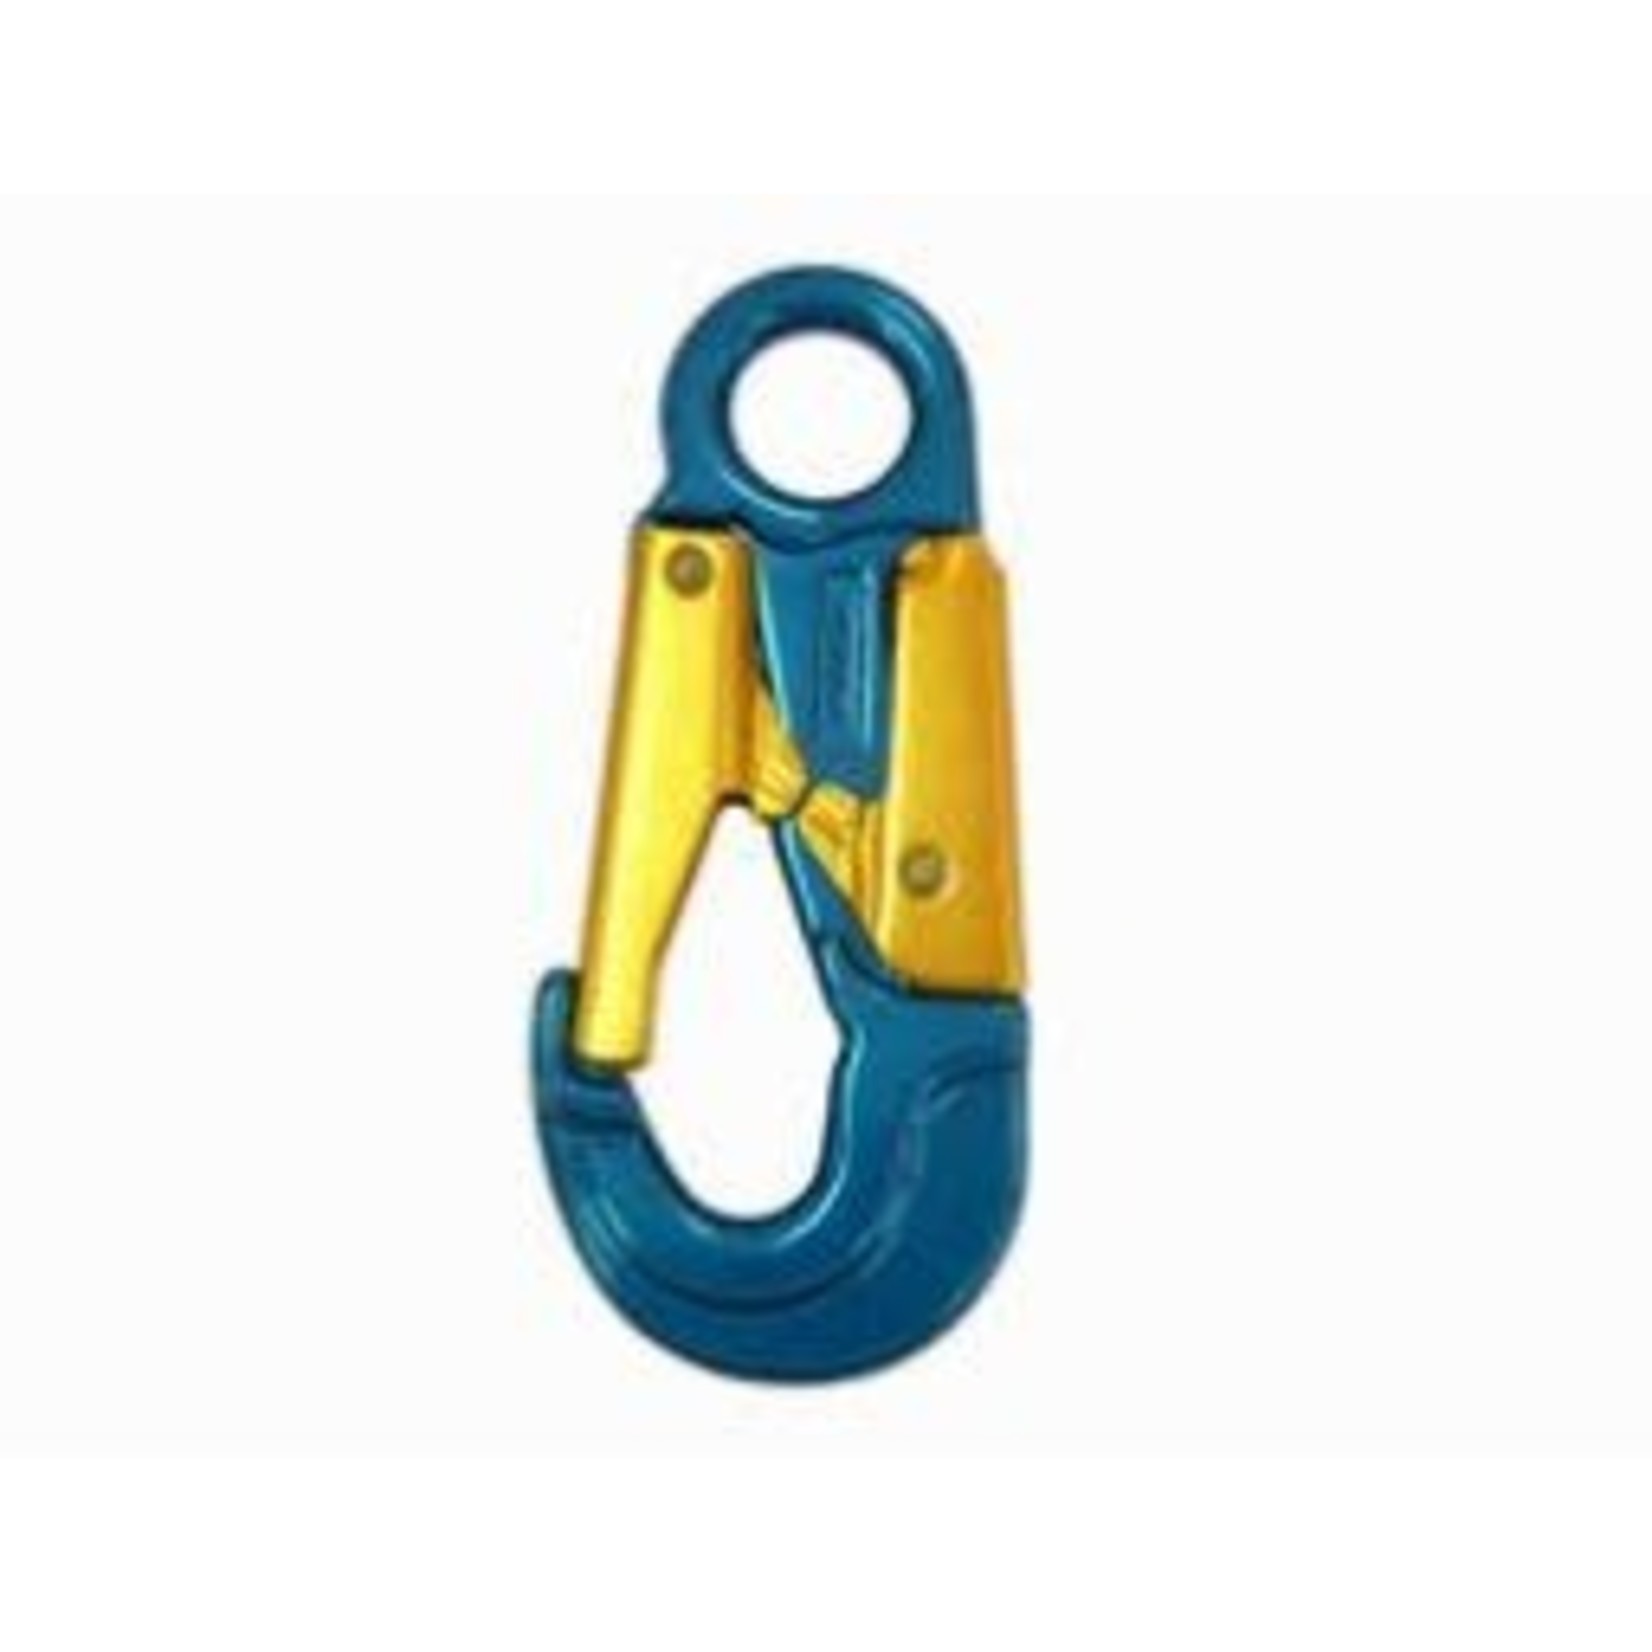 U.S. Rigging Snap, Aluminum, Double Locking Blue Anodized 27Kn Mbs